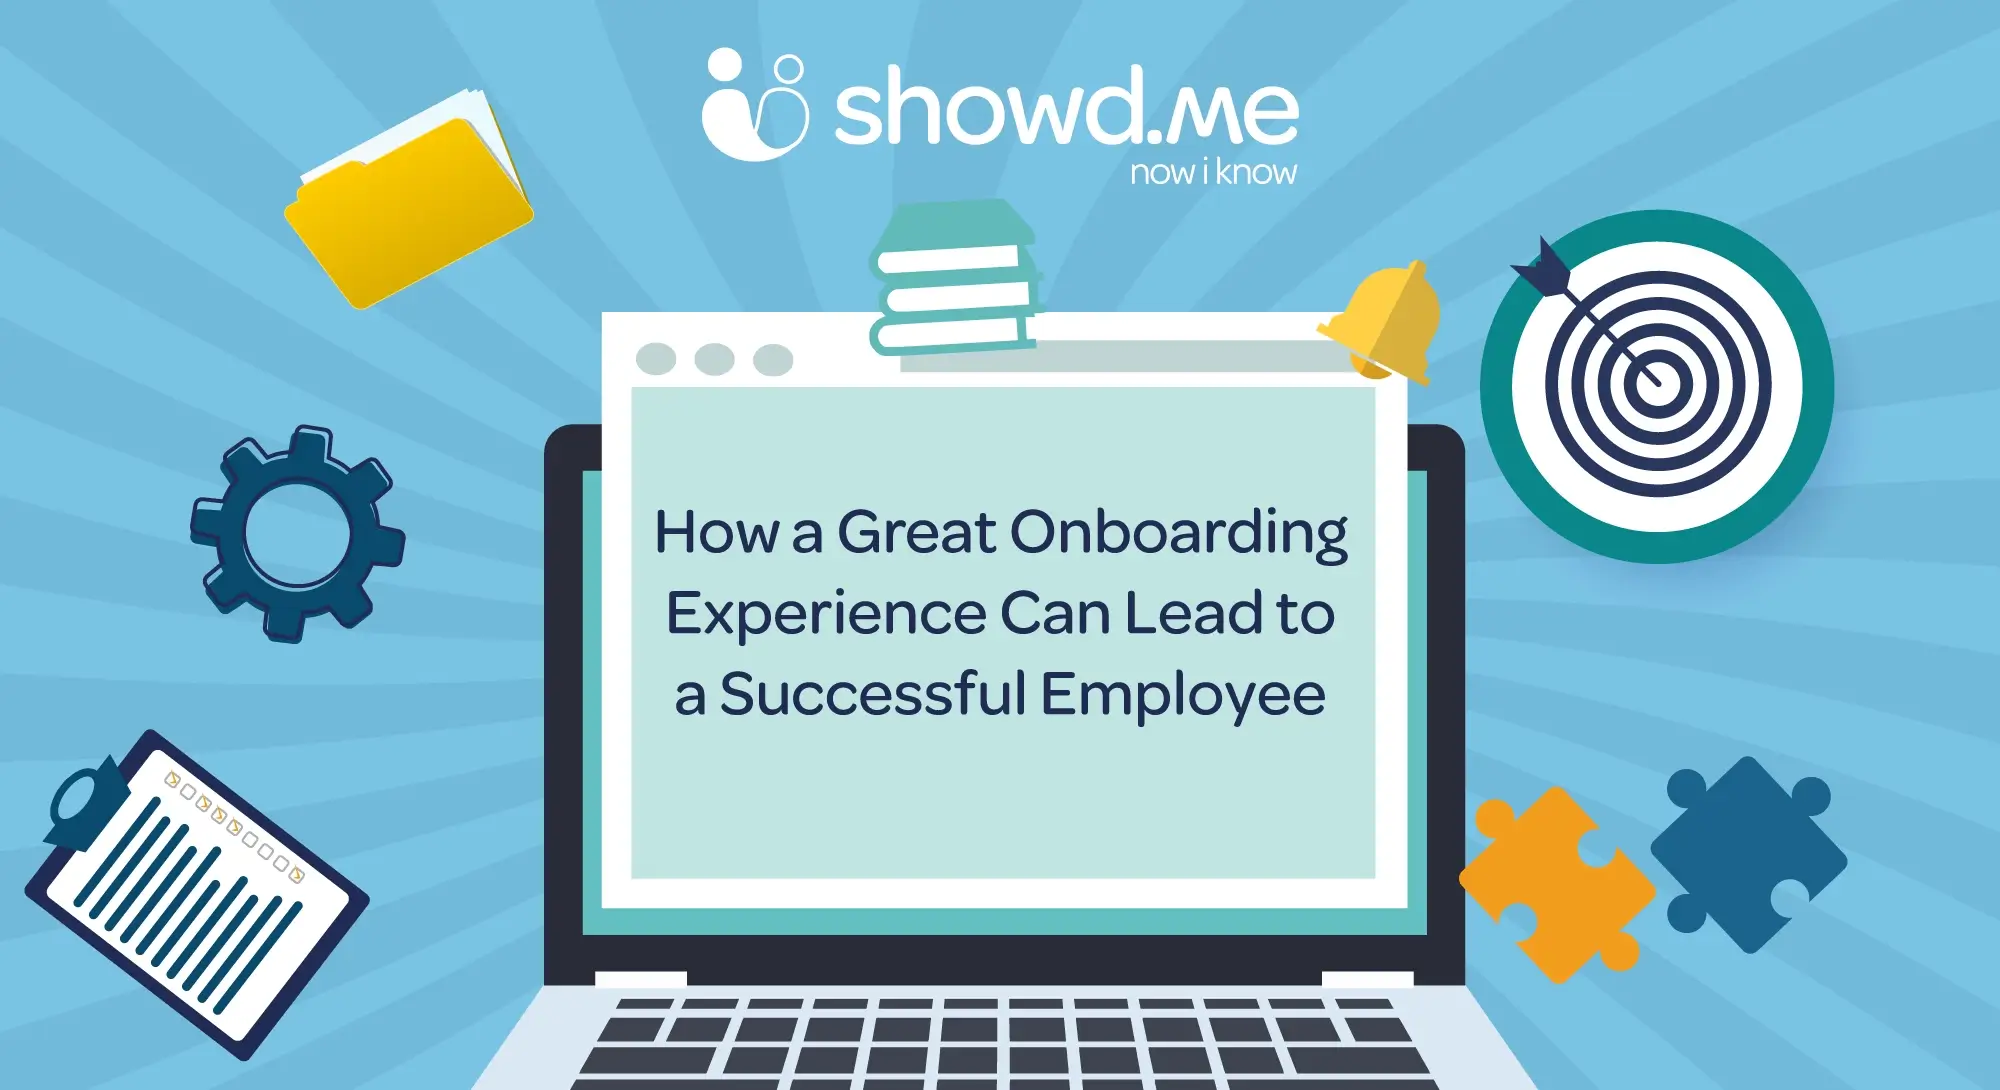 How a great onboarding experience can lead to a successful employee